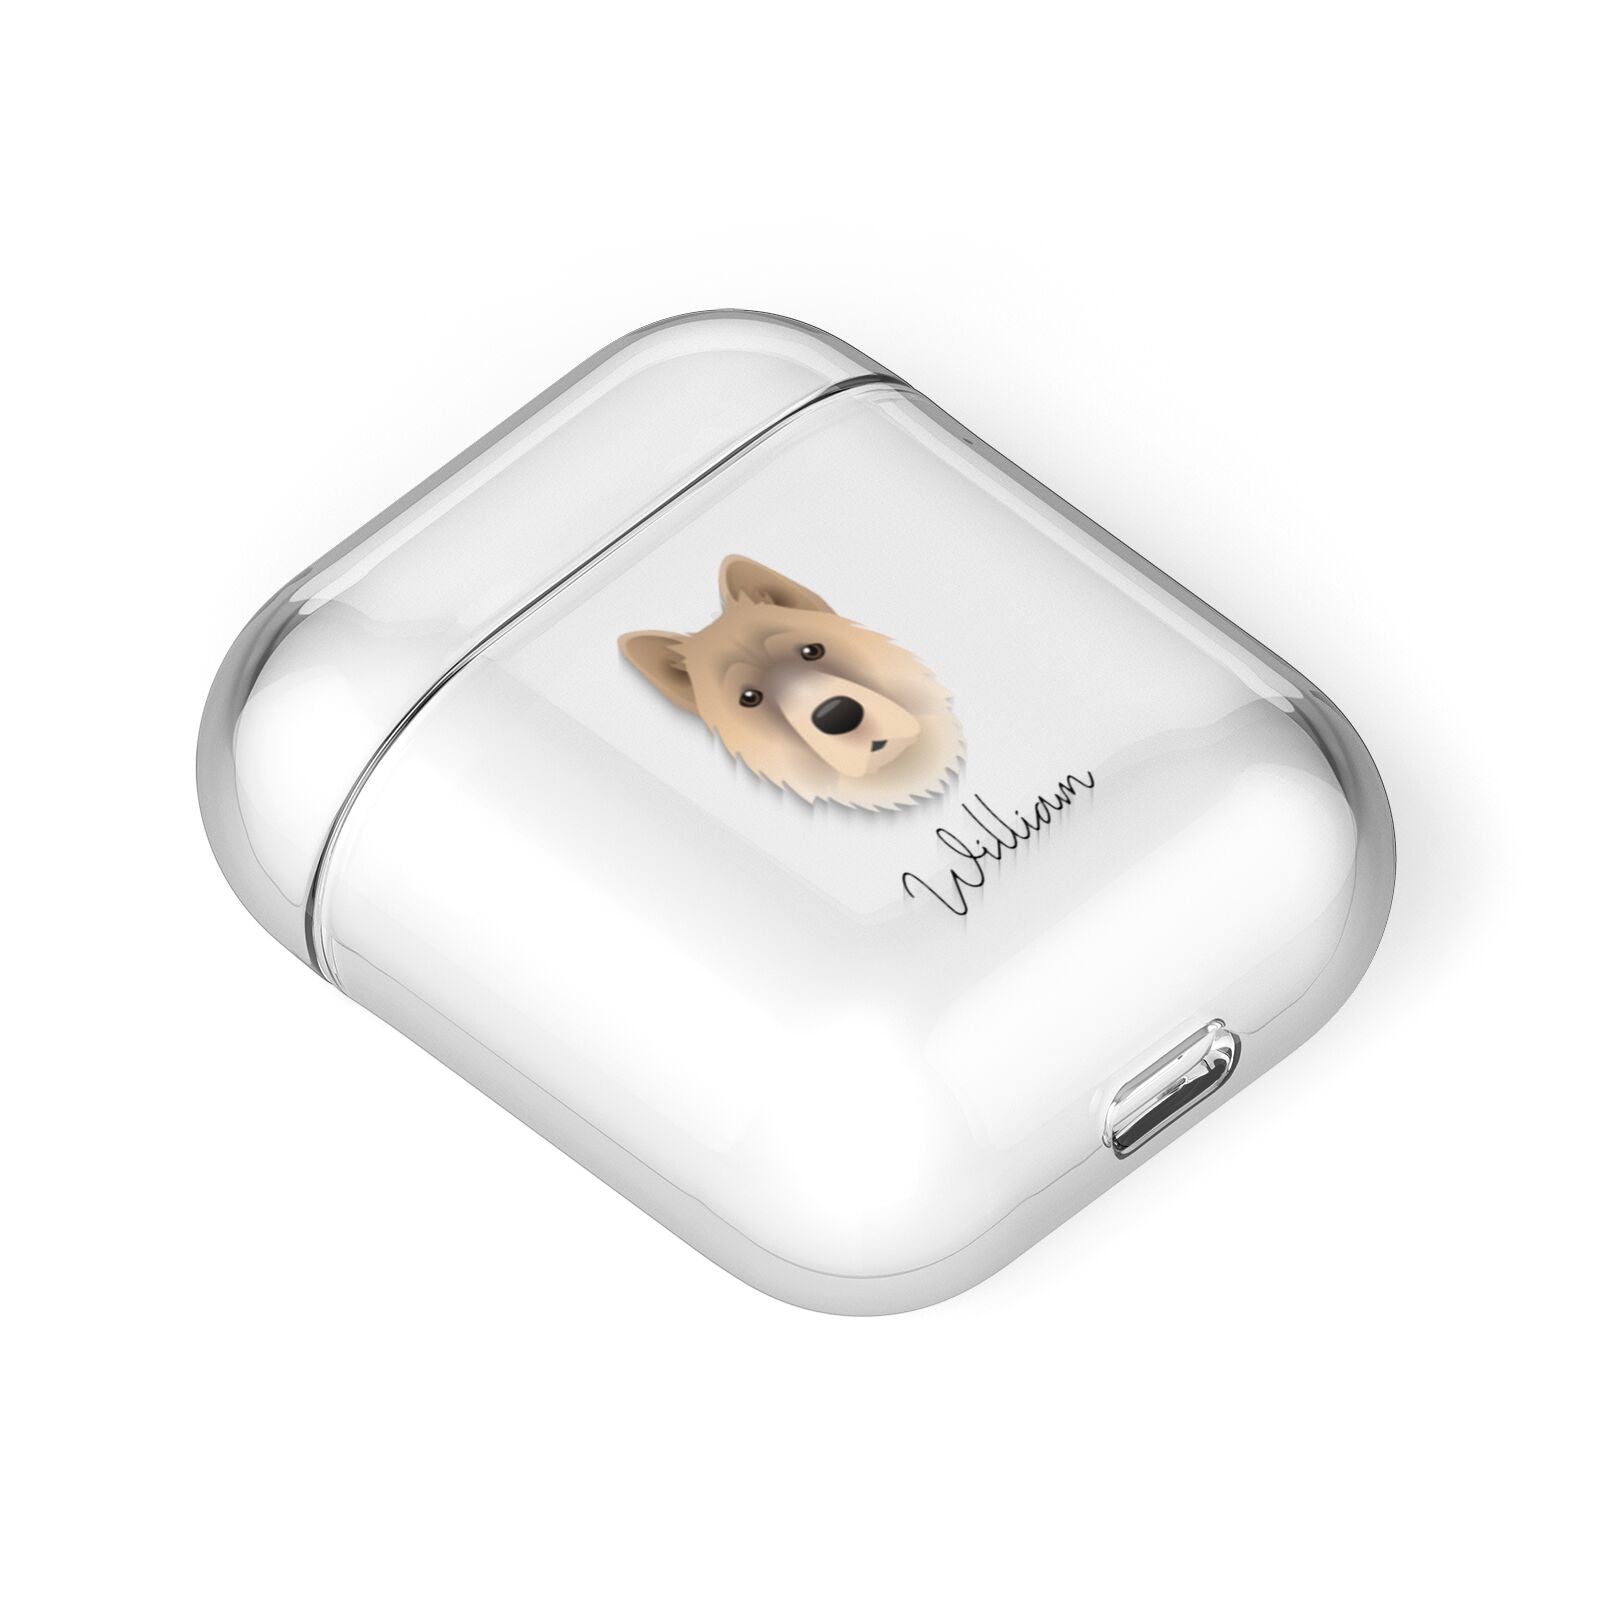 Chow Shepherd Personalised AirPods Case Laid Flat